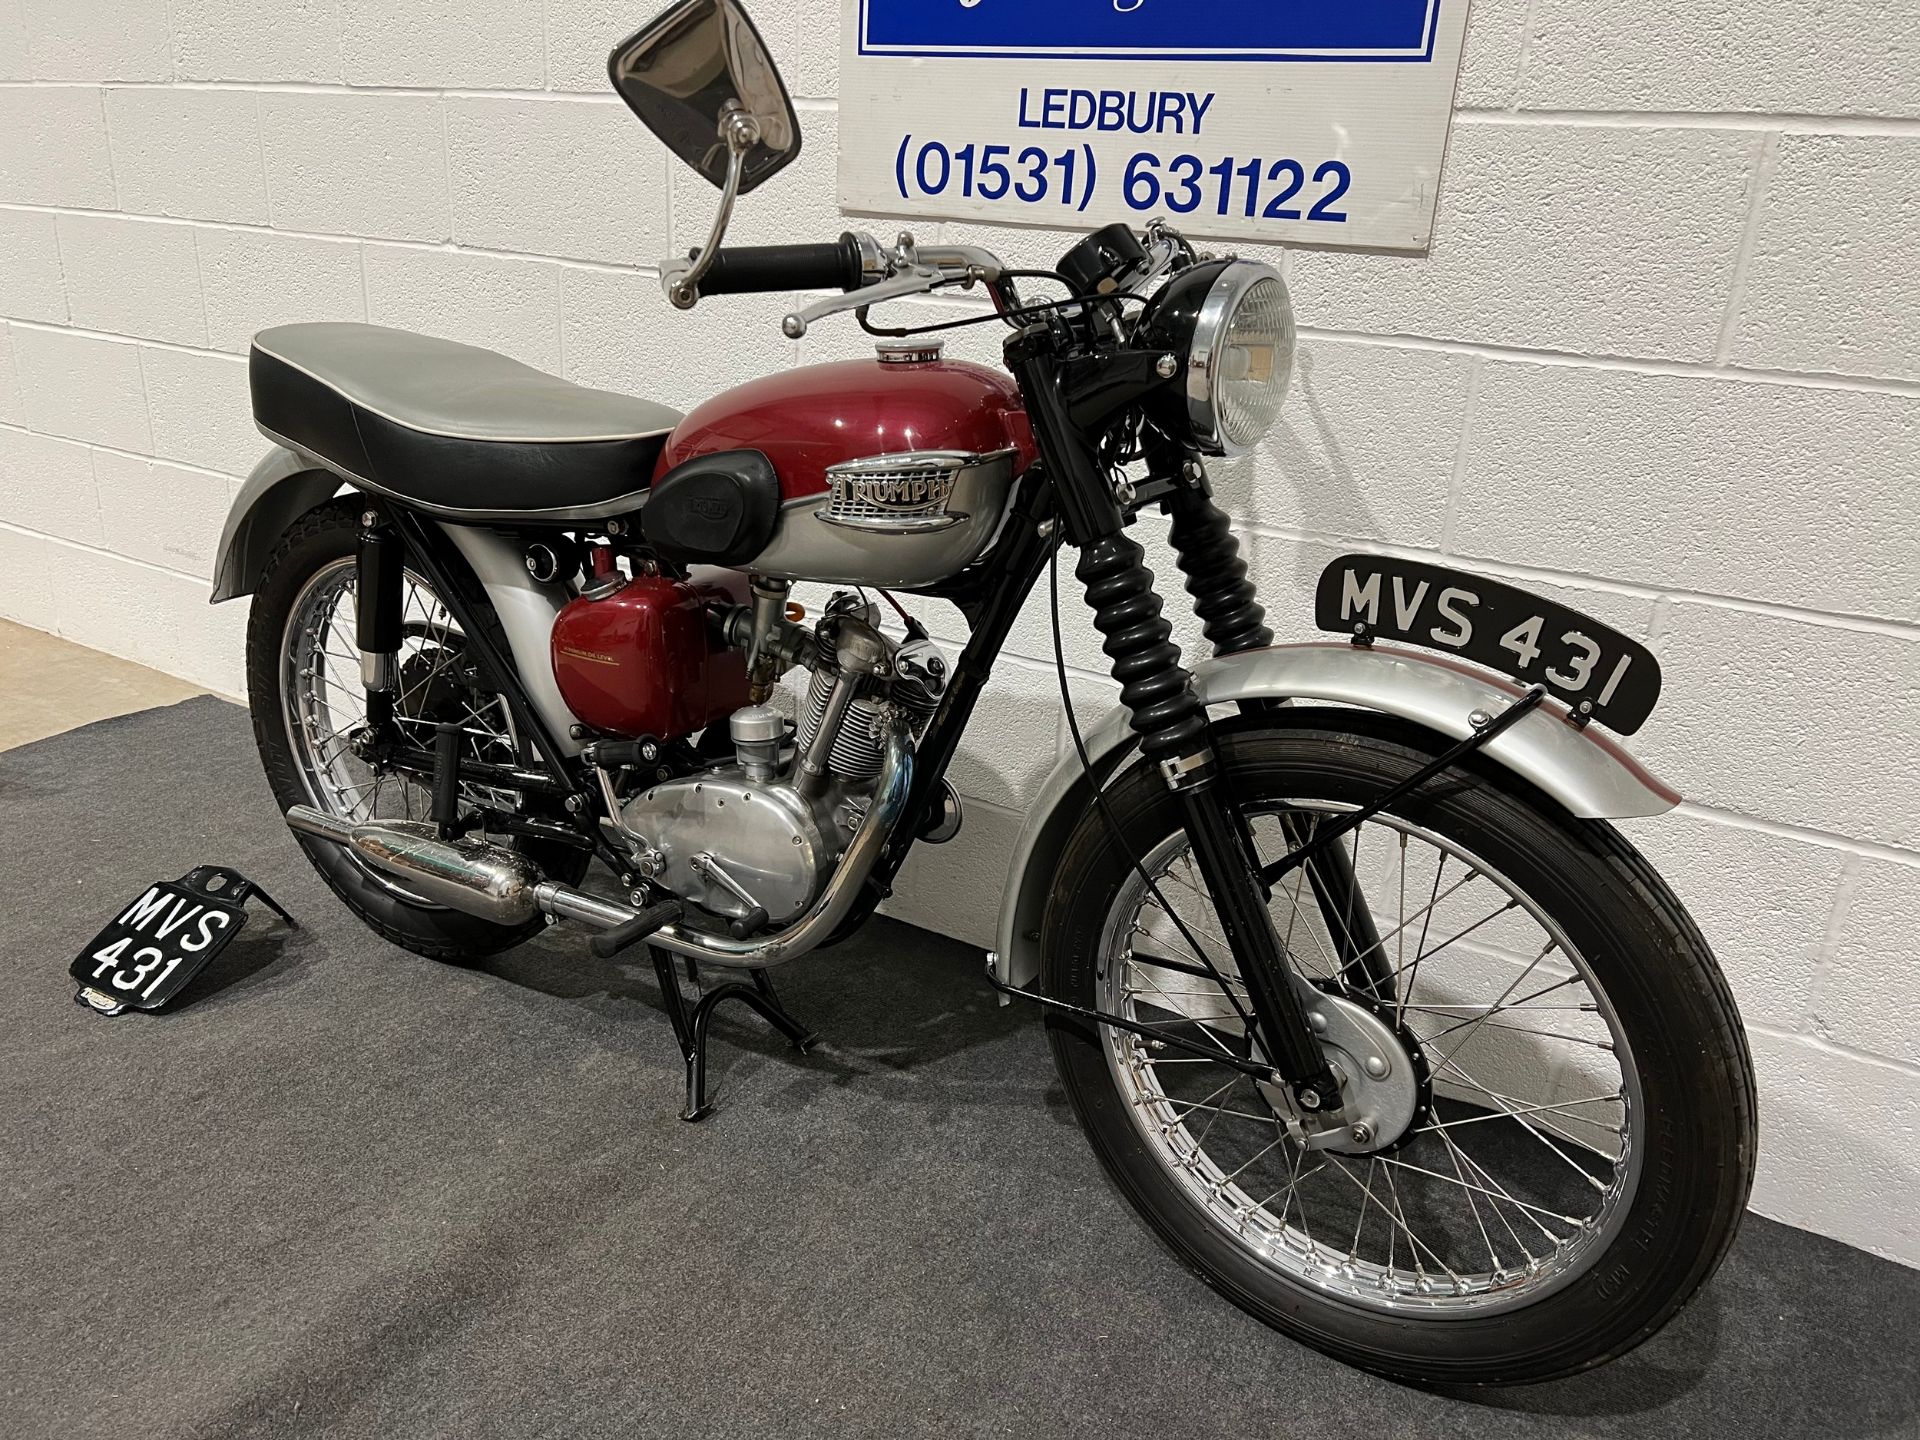 Triumph Tiger cub motorcycle. 1961. 199cc. Frame no. T-76741 Engine no. T2076741 Property of a